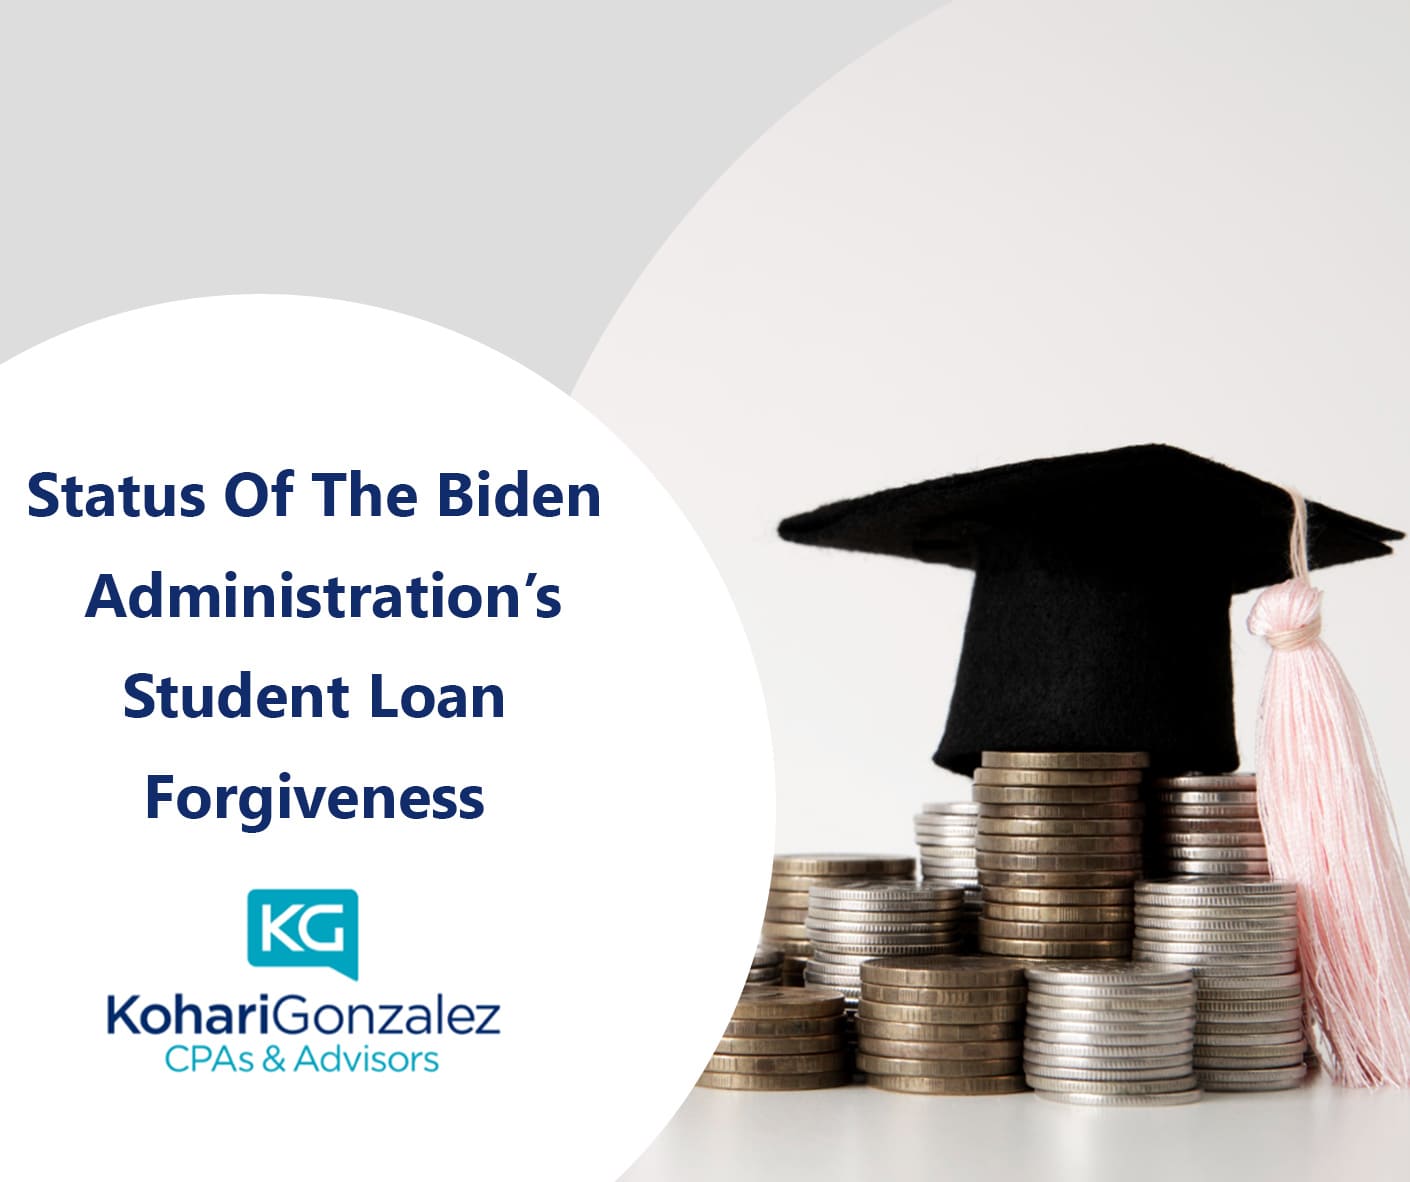 Status Of The Biden Administration’s Student Loan Forgiveness